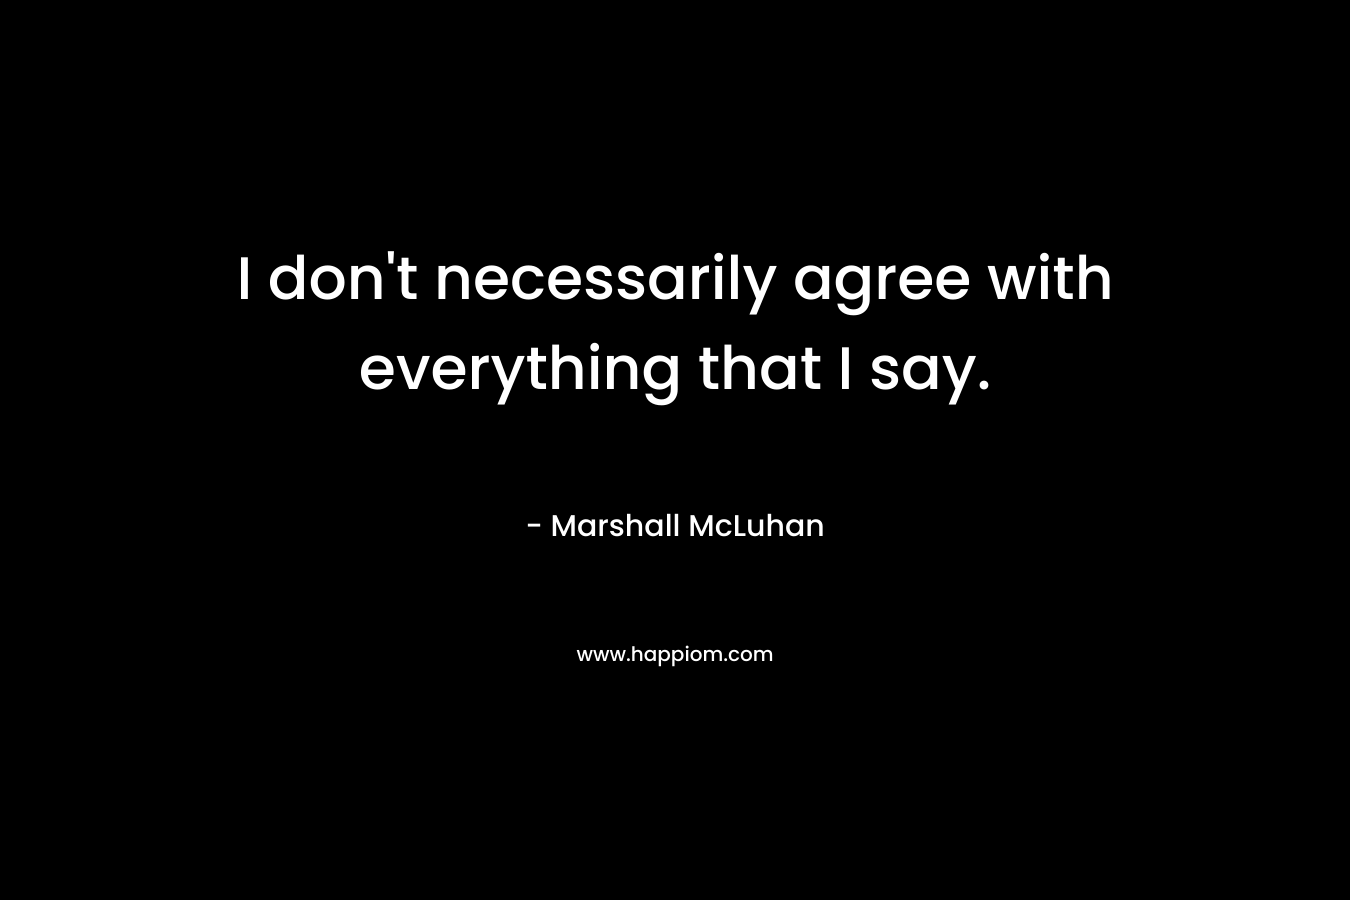 I don’t necessarily agree with everything that I say. – Marshall McLuhan